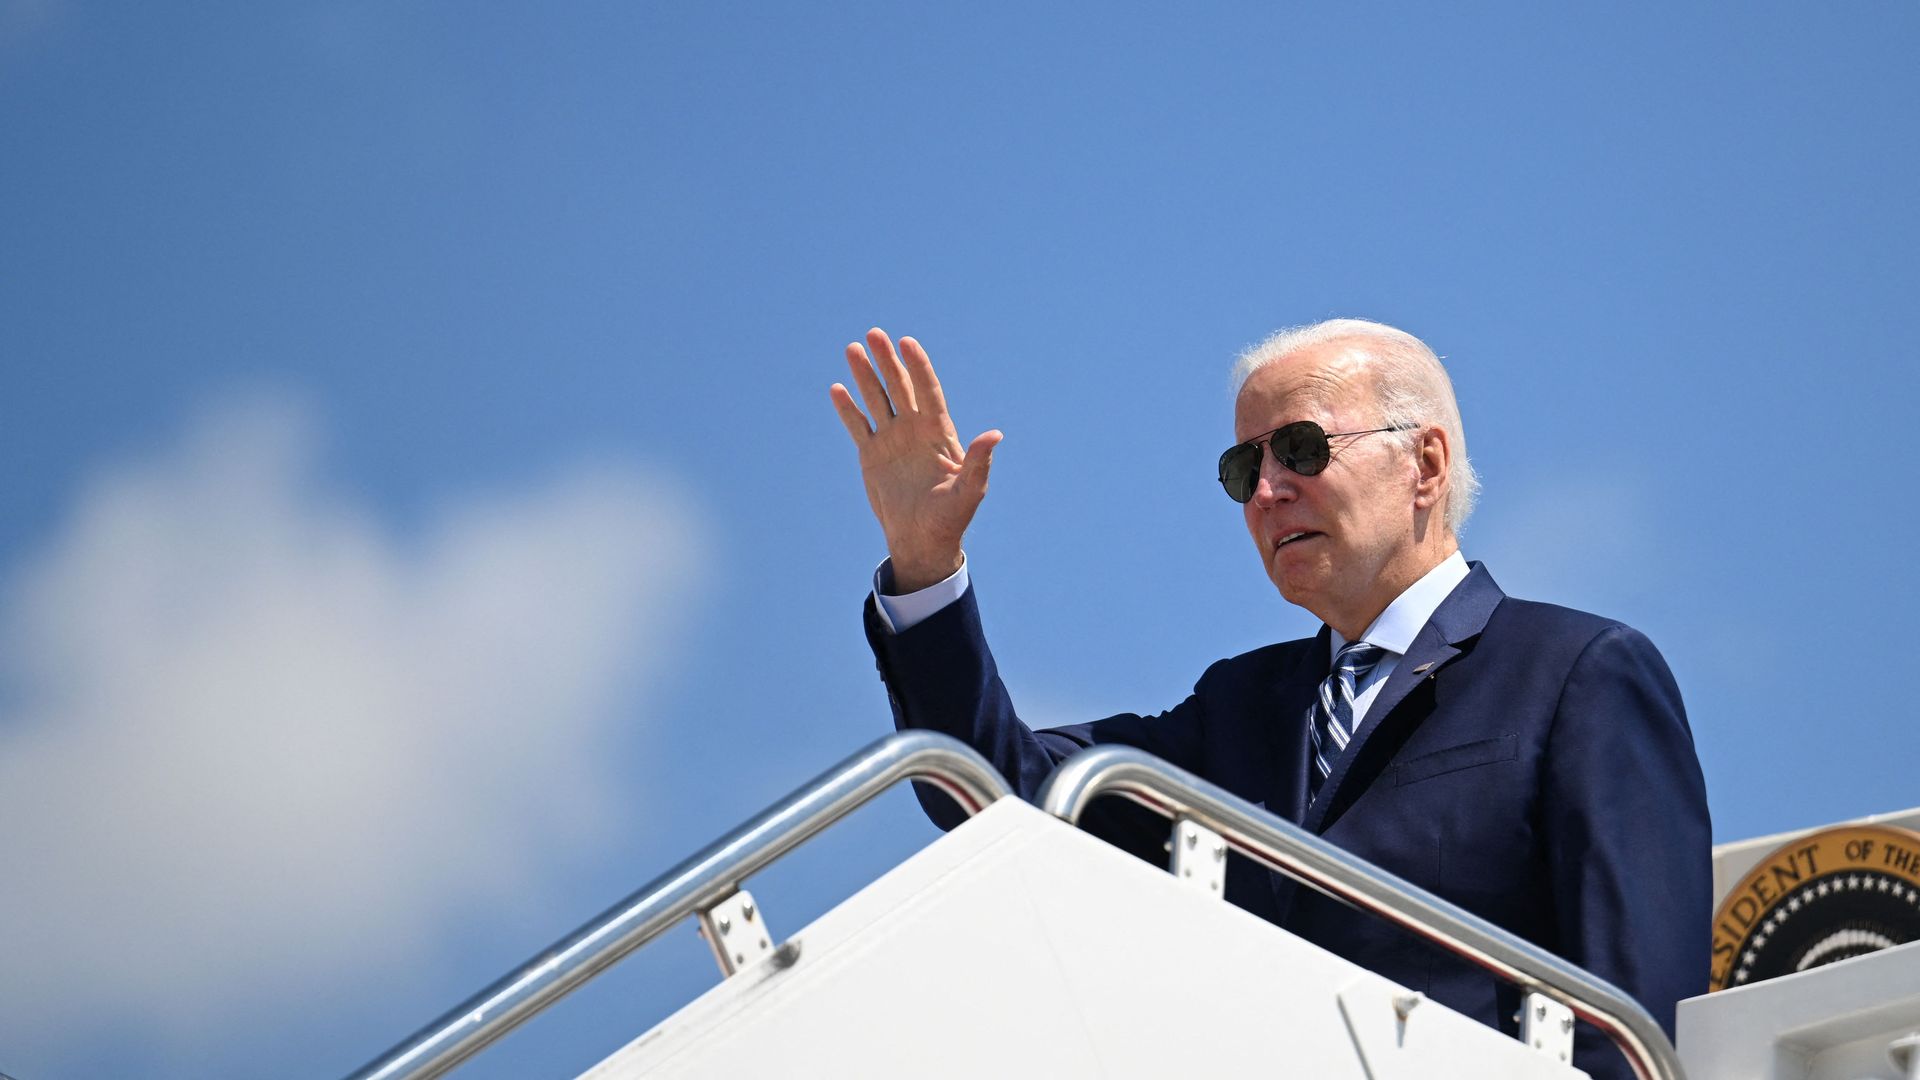 President Joe Biden waves while boarding Air Force One at Joint Base Andrews in Maryland on August 30, 2022